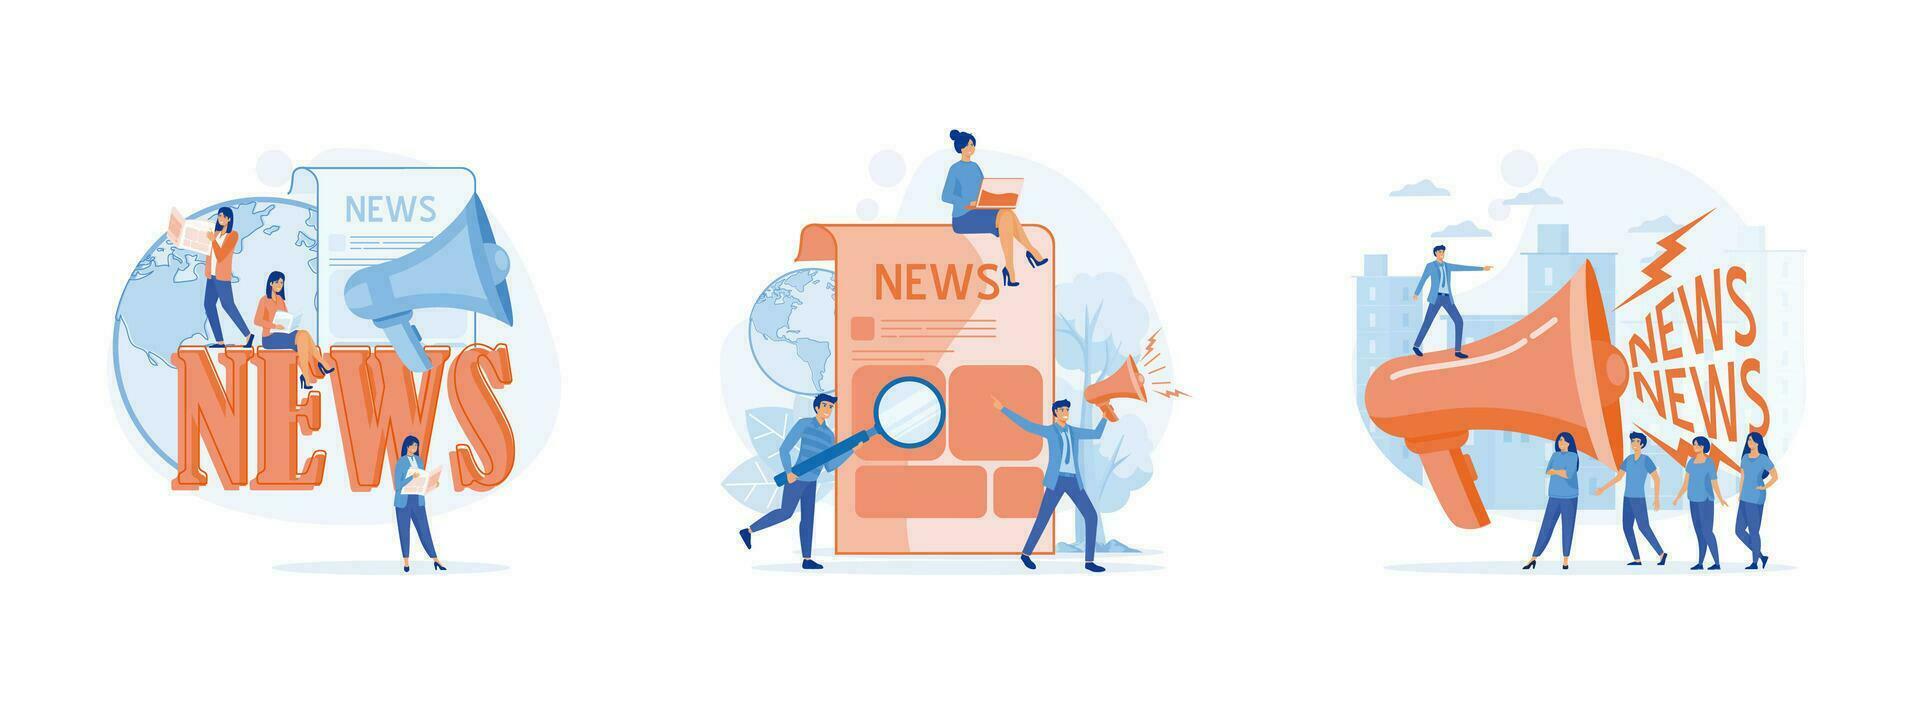 Global news. people read breaking news on newspaper.  tiny people listening to the latest news. Breaking news set flat vector modern illustration